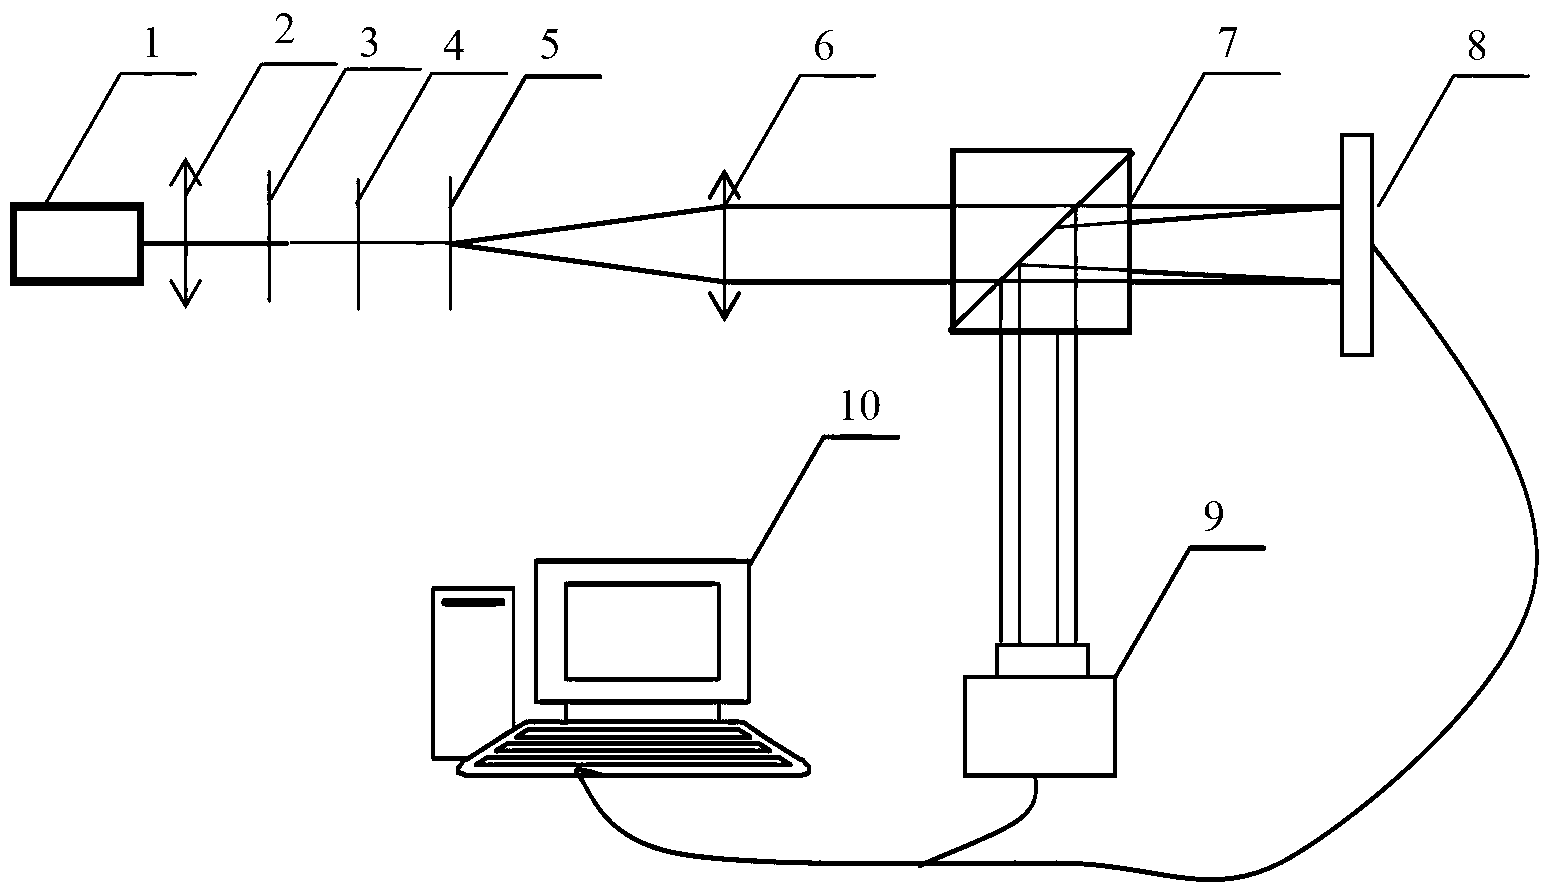 Incoherent digital holography three-dimensional dynamic microscopic imaging system and method